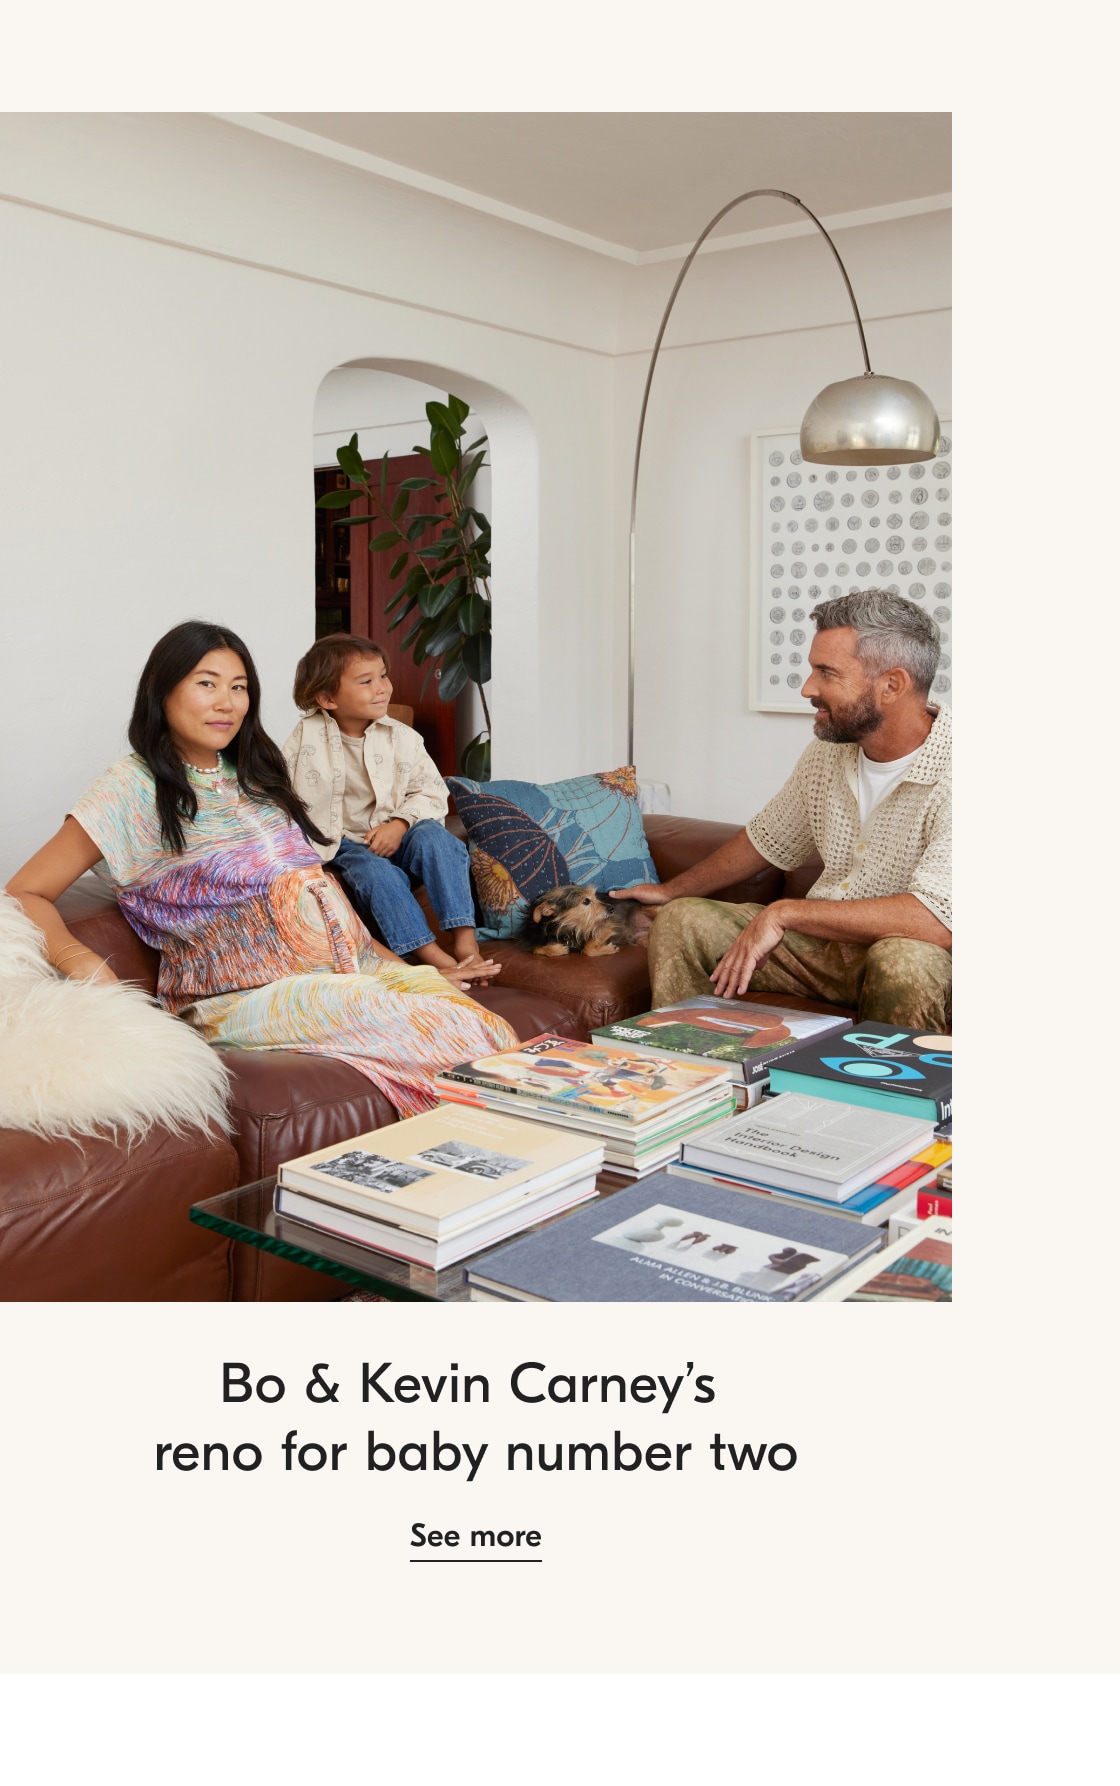 Bo & Kevin Corney's reno for baby number two